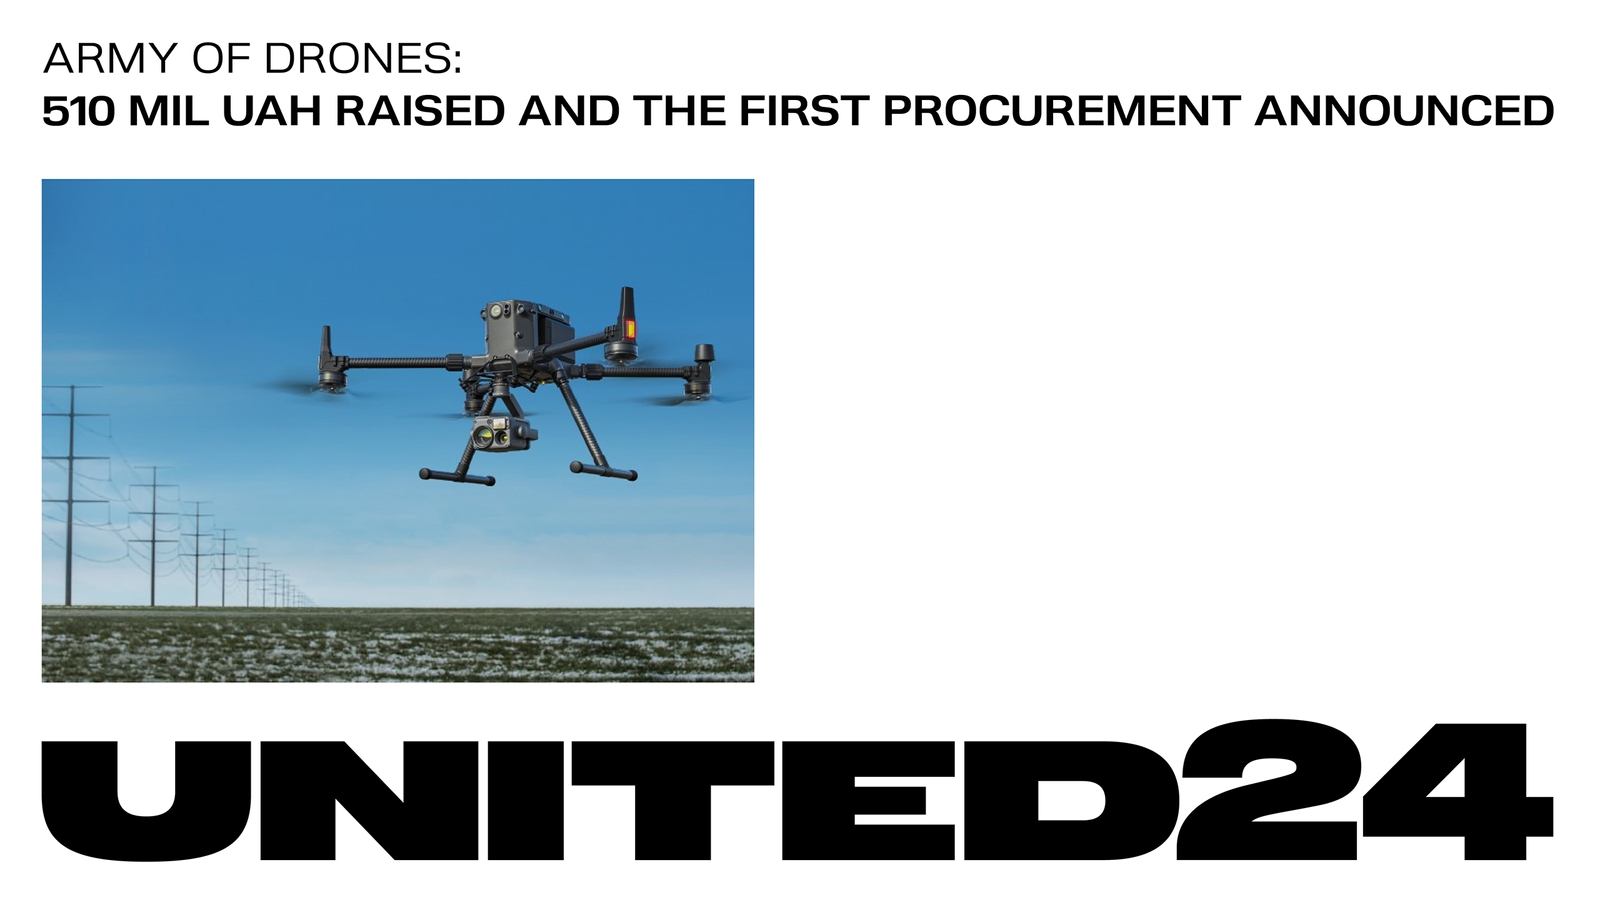 Over UAH 510 Million was Raised for the Army of Drones